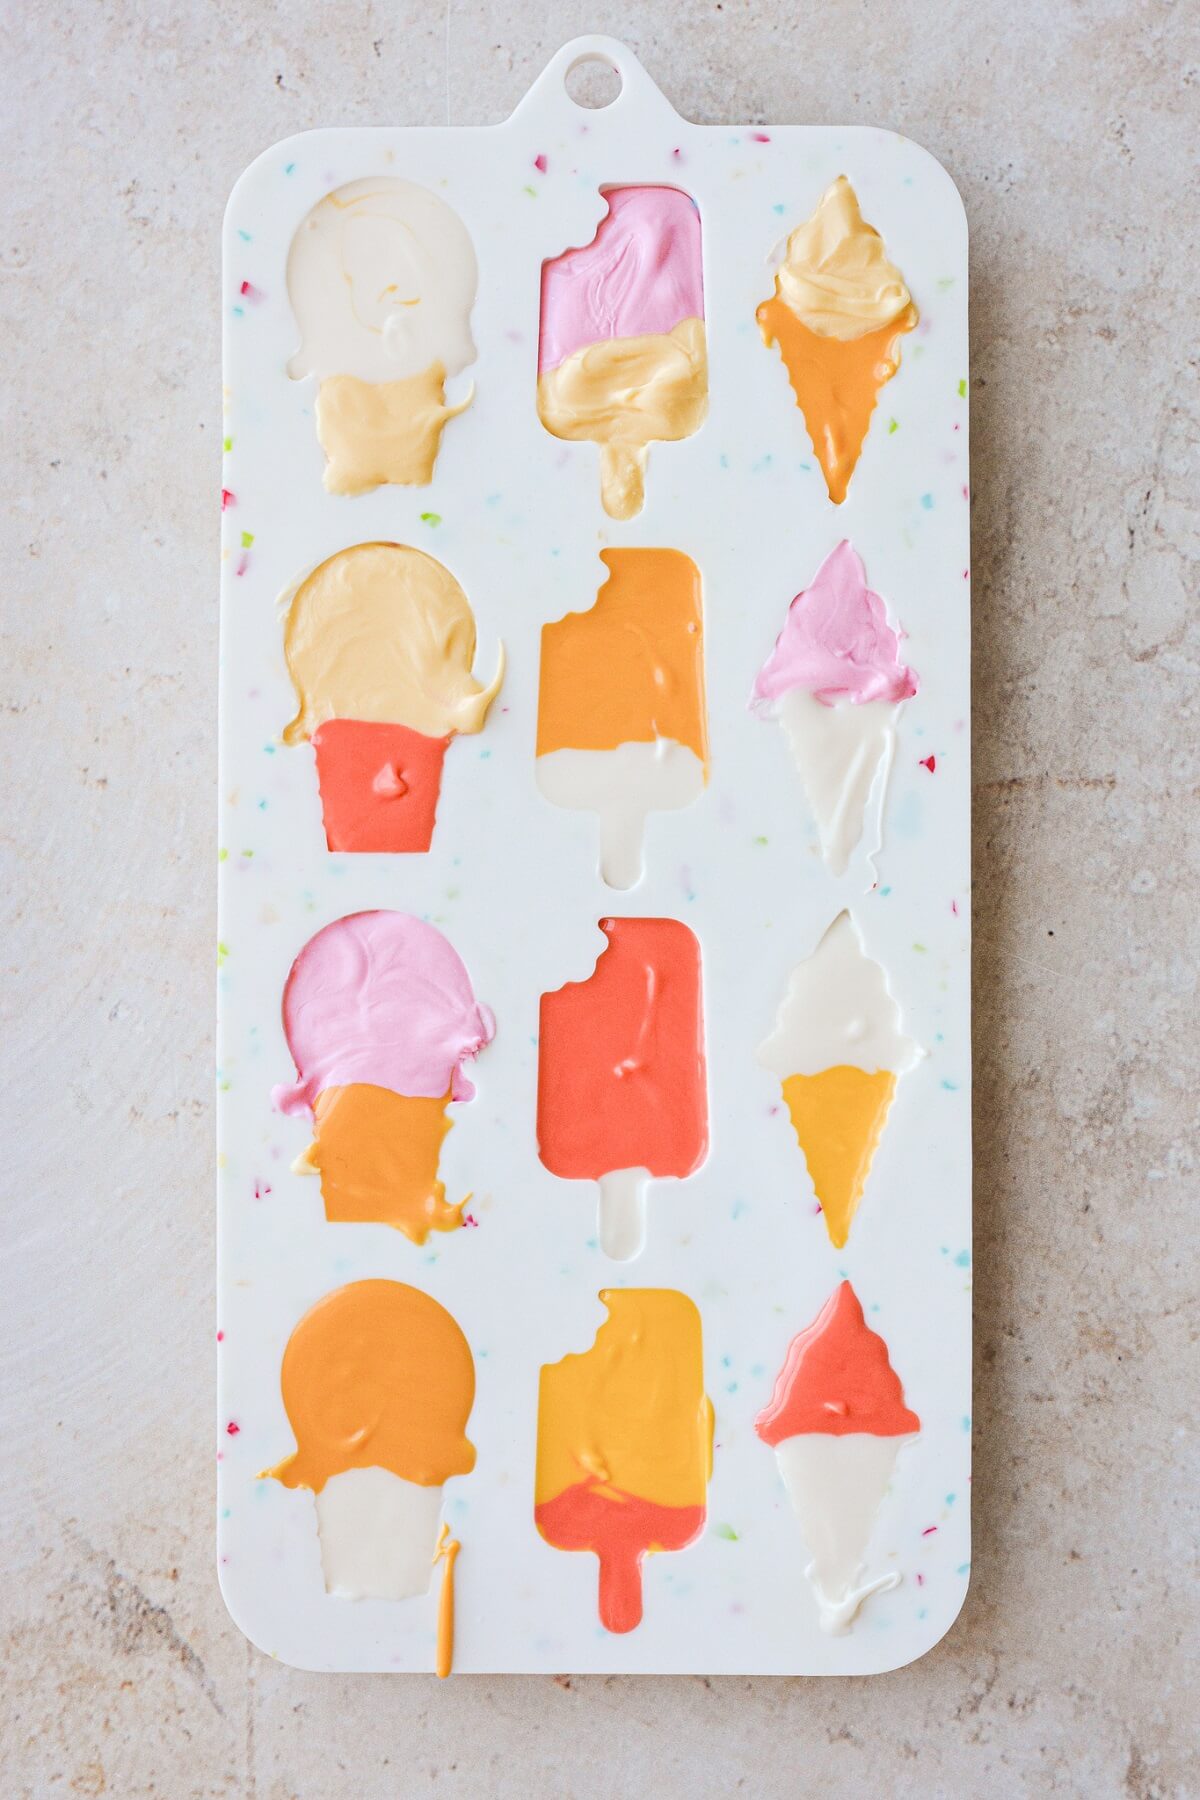 Candy melt ice cream cones in a silicone mold.